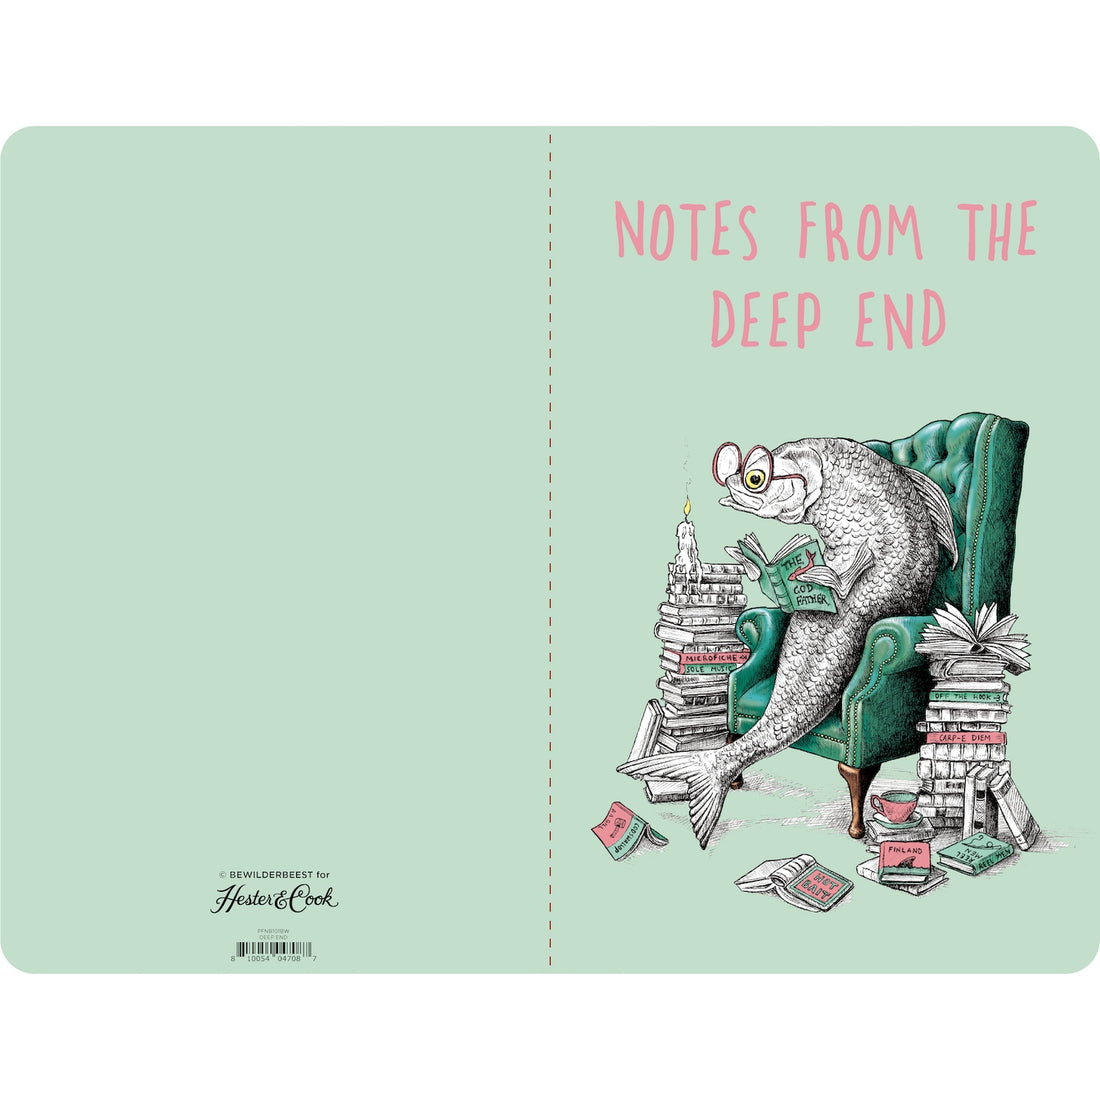 The open back and front cover of the Deep End Notebook, featuring a whimsical fish illustration on the front and a blank mint green background across the back.